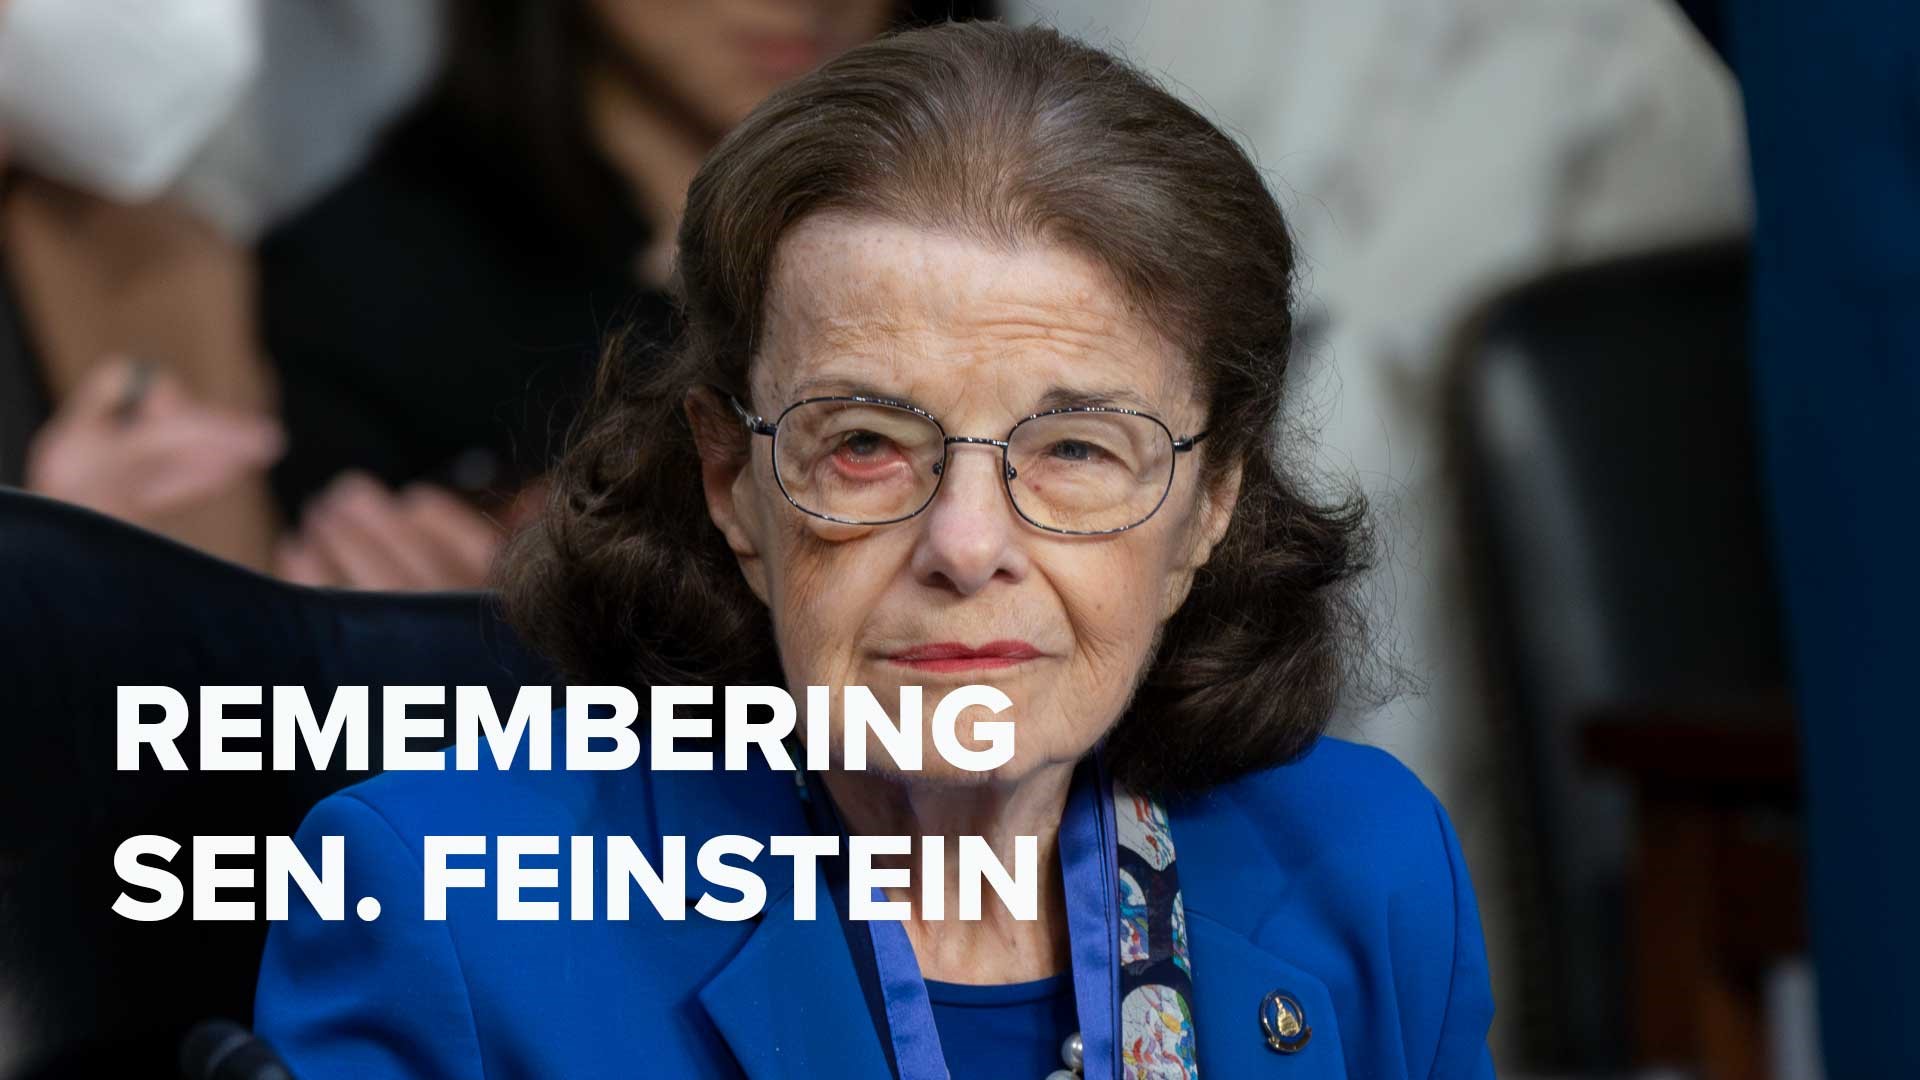 Feinstein's death has put new pressure on California's governor to replace her quickly, and is shining a spotlight on the 2024 campaign for her seat.